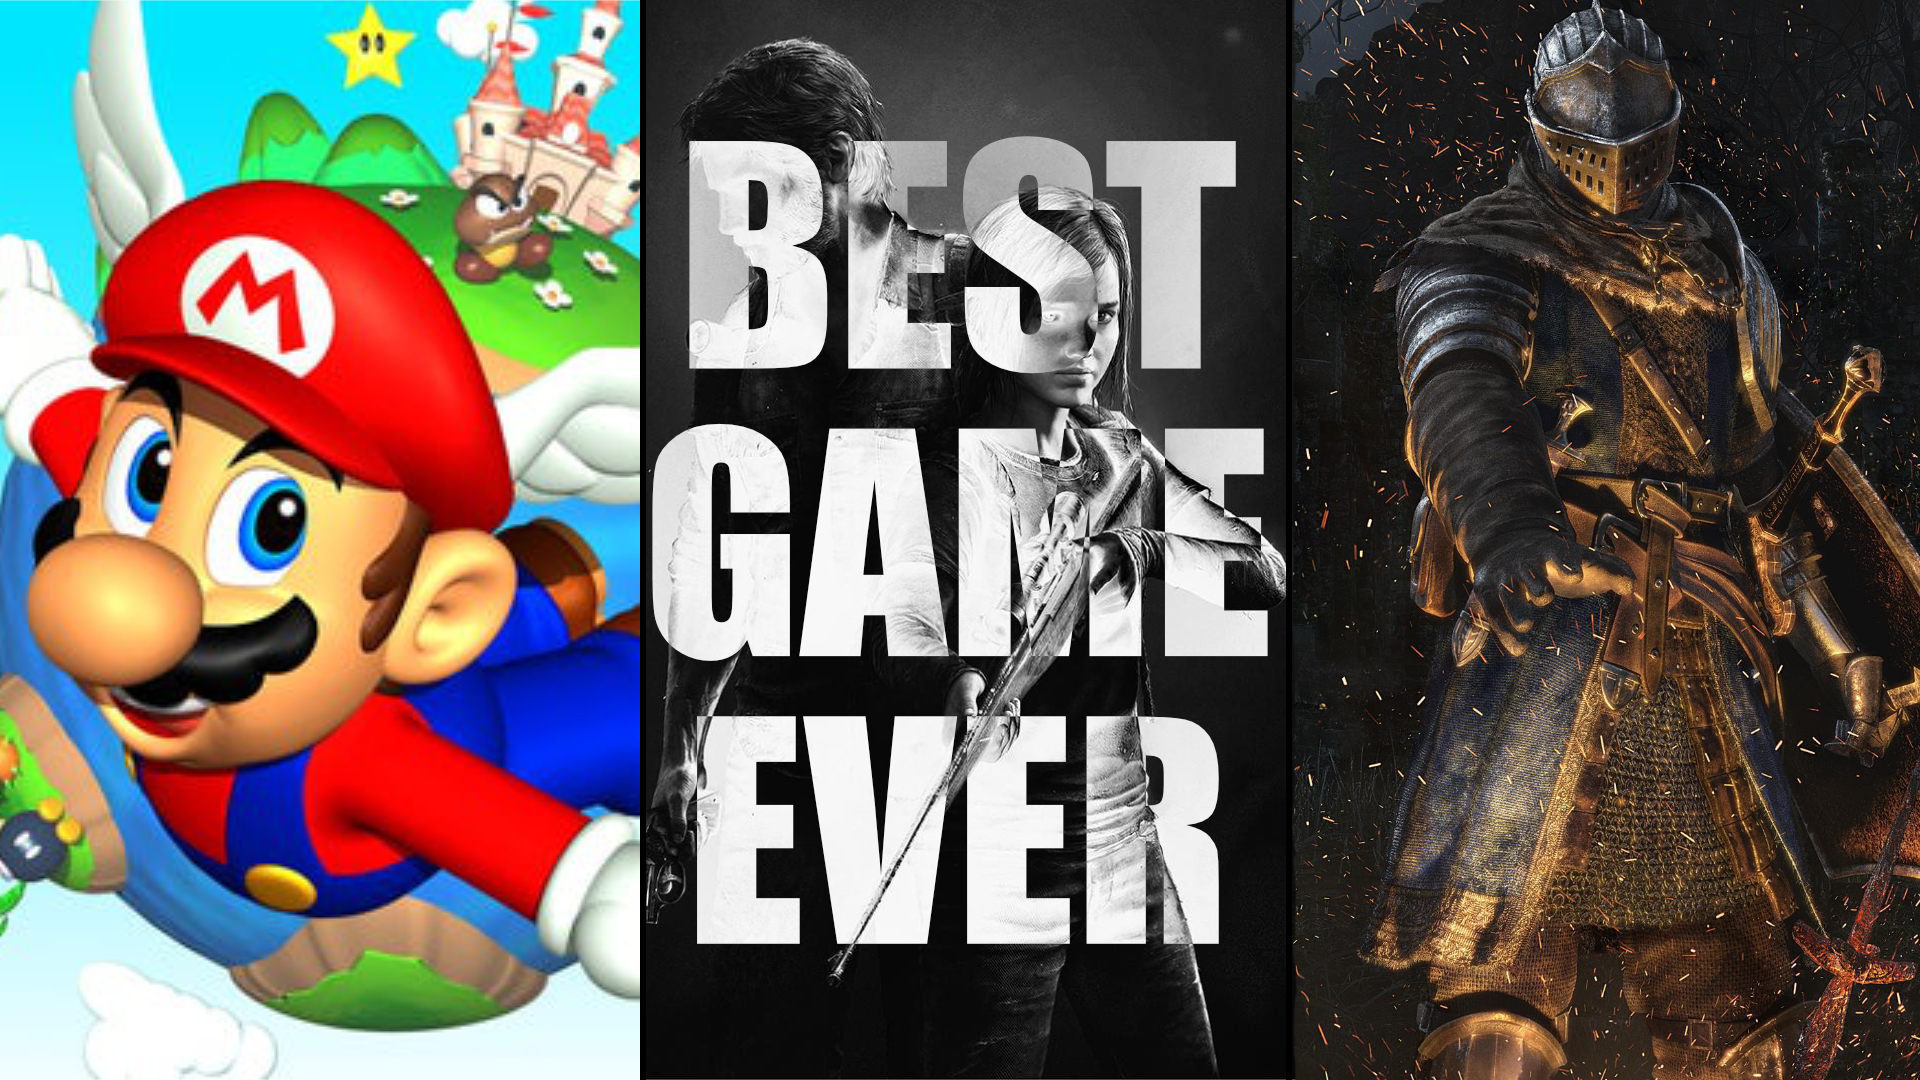 Gaming fans vote for best games of all time – and Super Mario didn't win